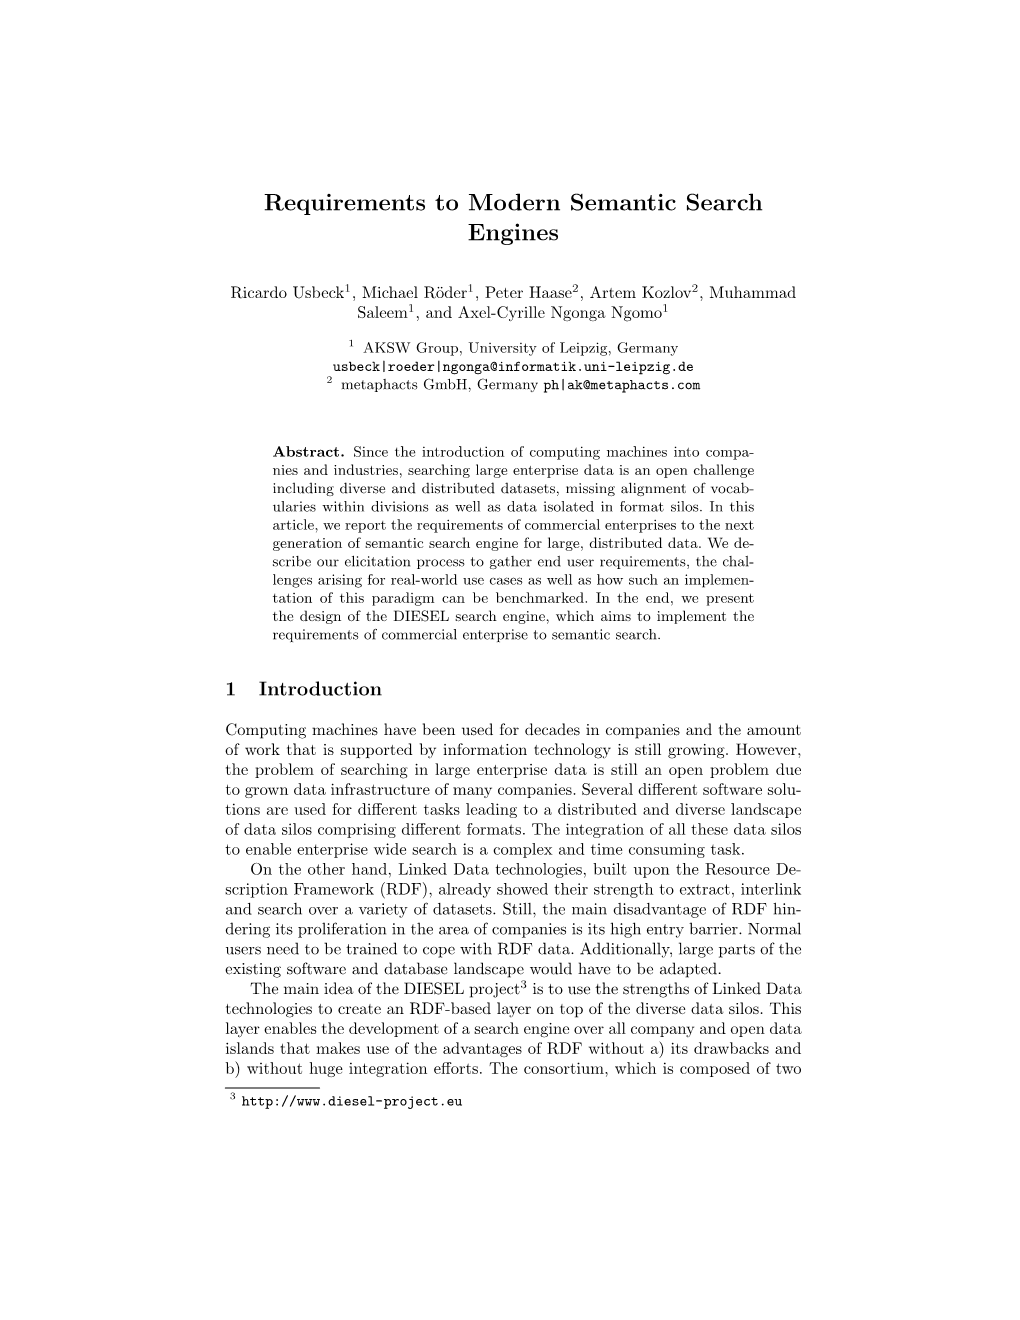 Requirements to Modern Semantic Search Engines